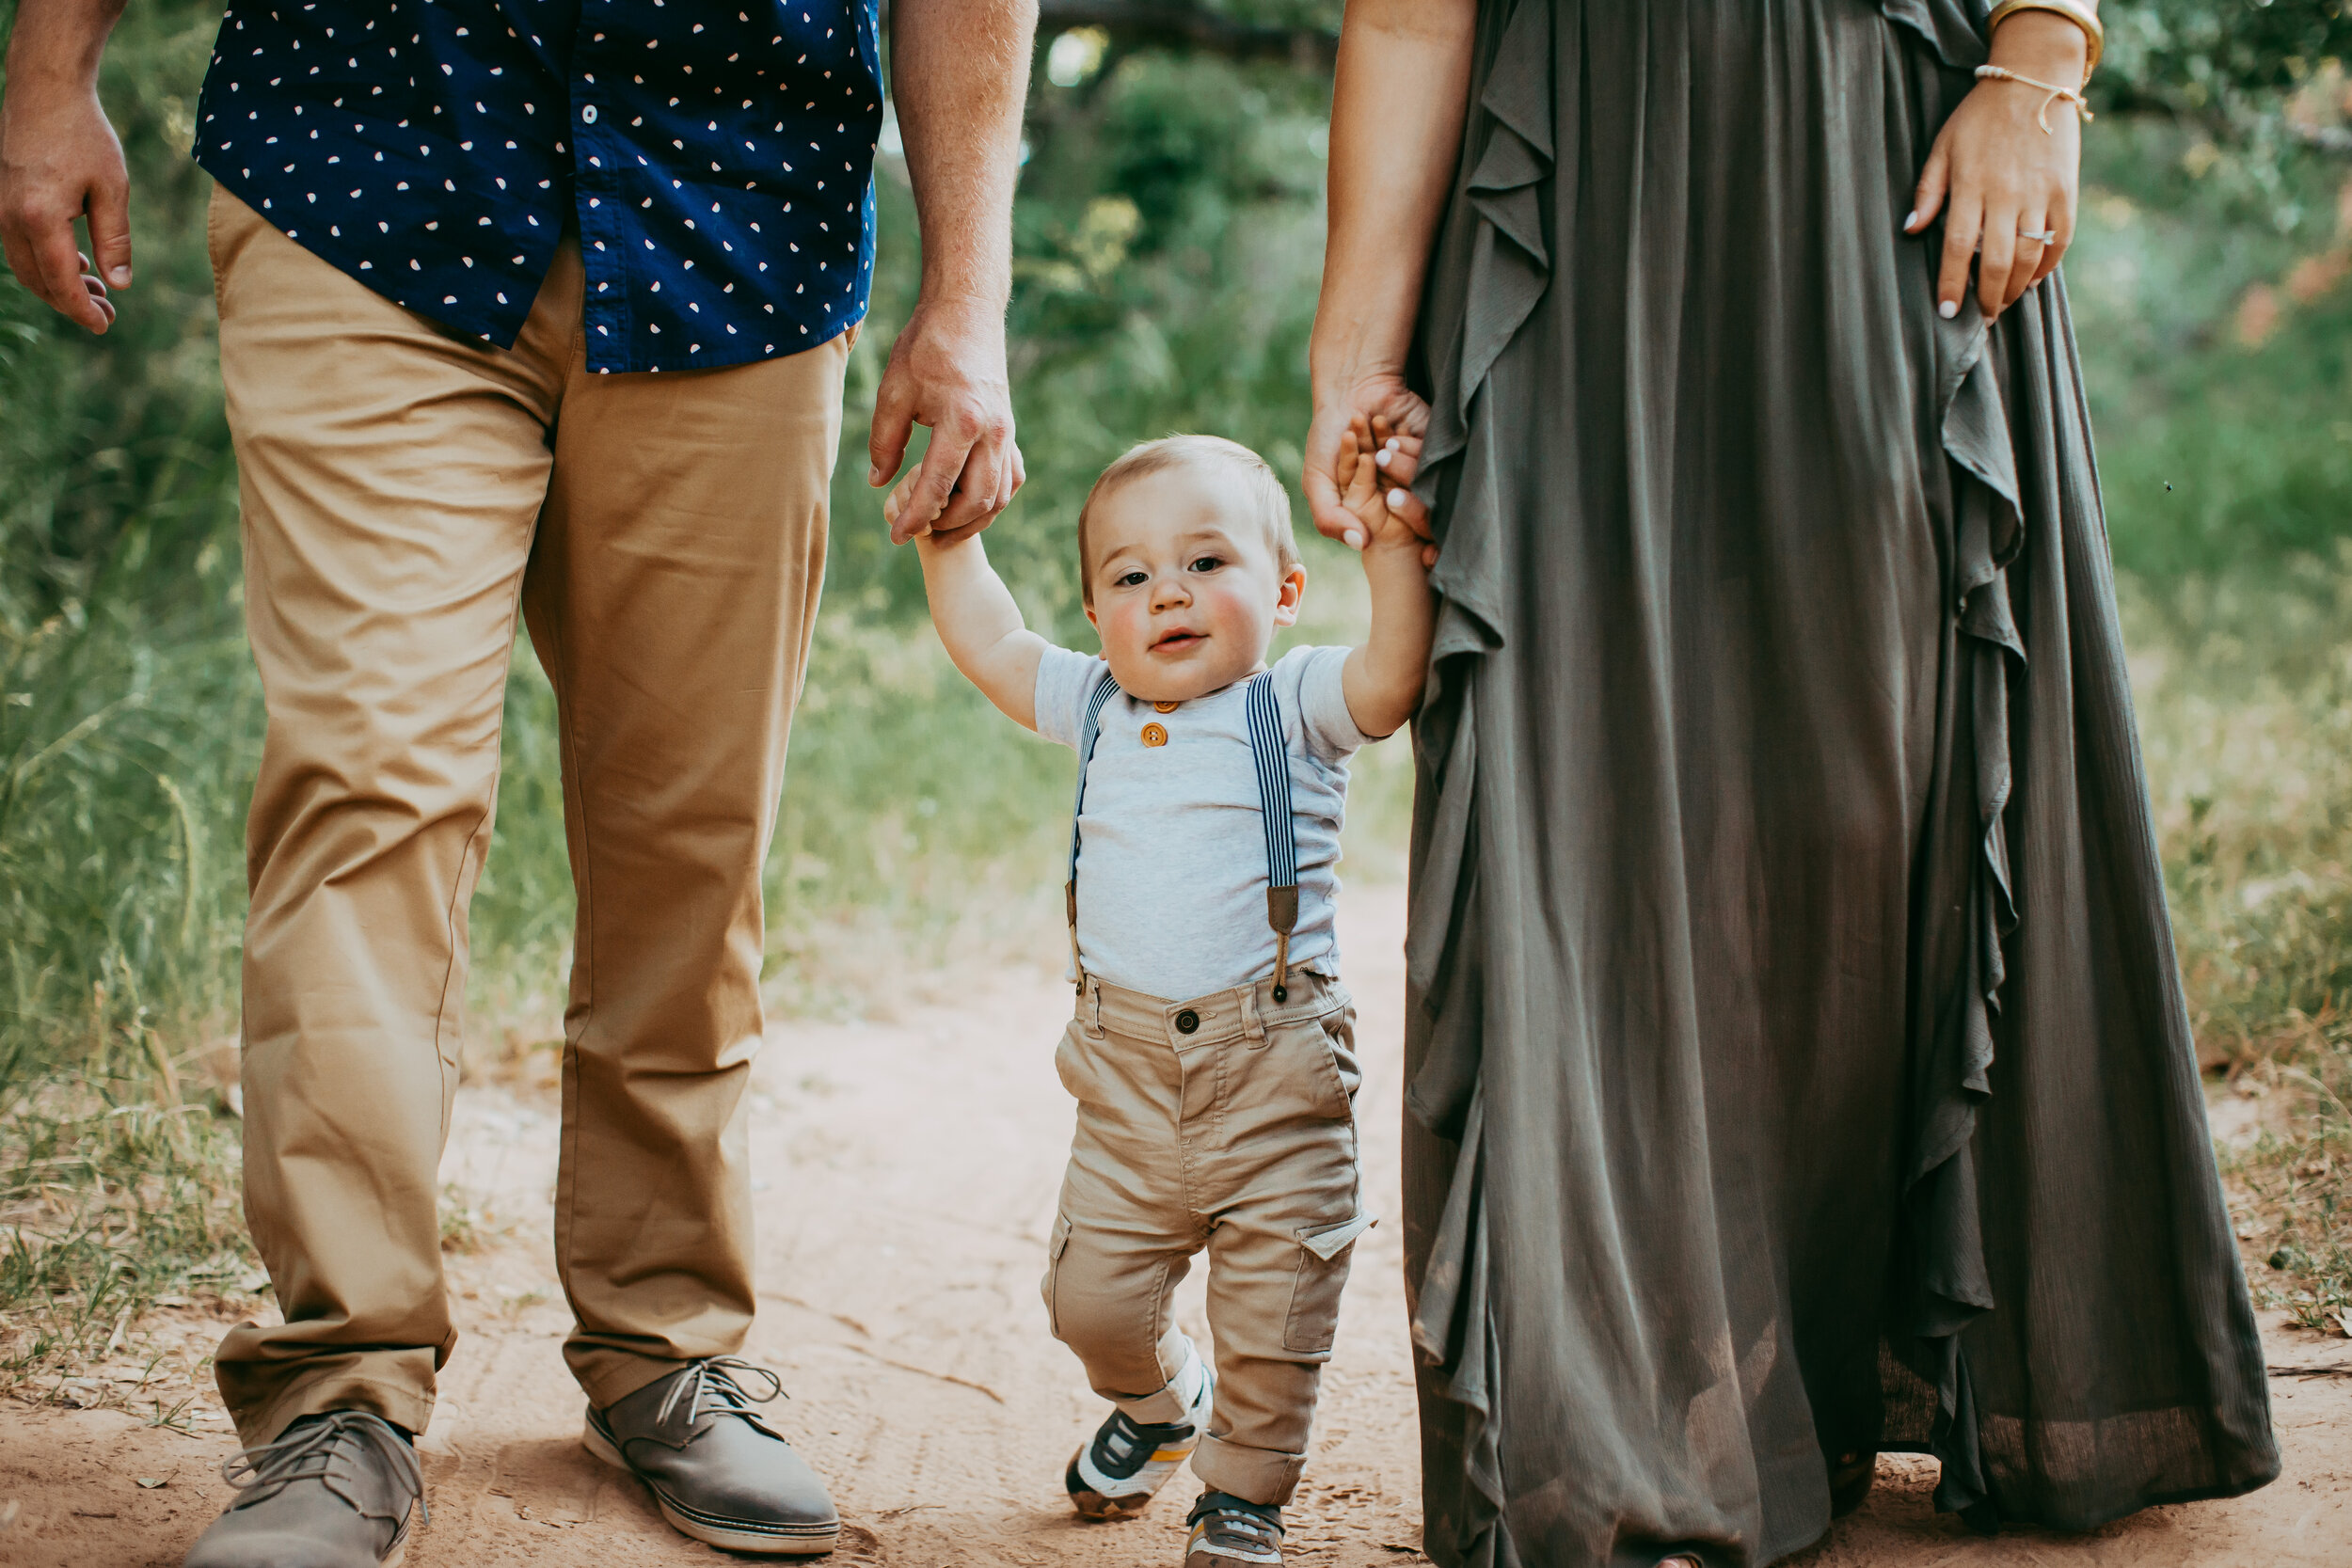  Distant shot of little one walking with mom and dad down the dirt path surrounded by green grass #tealawardphotography #texasfamilyphotographer #amarillophotographer #amarillofamilyphotographer #lifestylephotography #emotionalphotography #familyphotoshoot #family #lovingsiblings #purejoy #familyphotos #naturalfamilyinteraction 